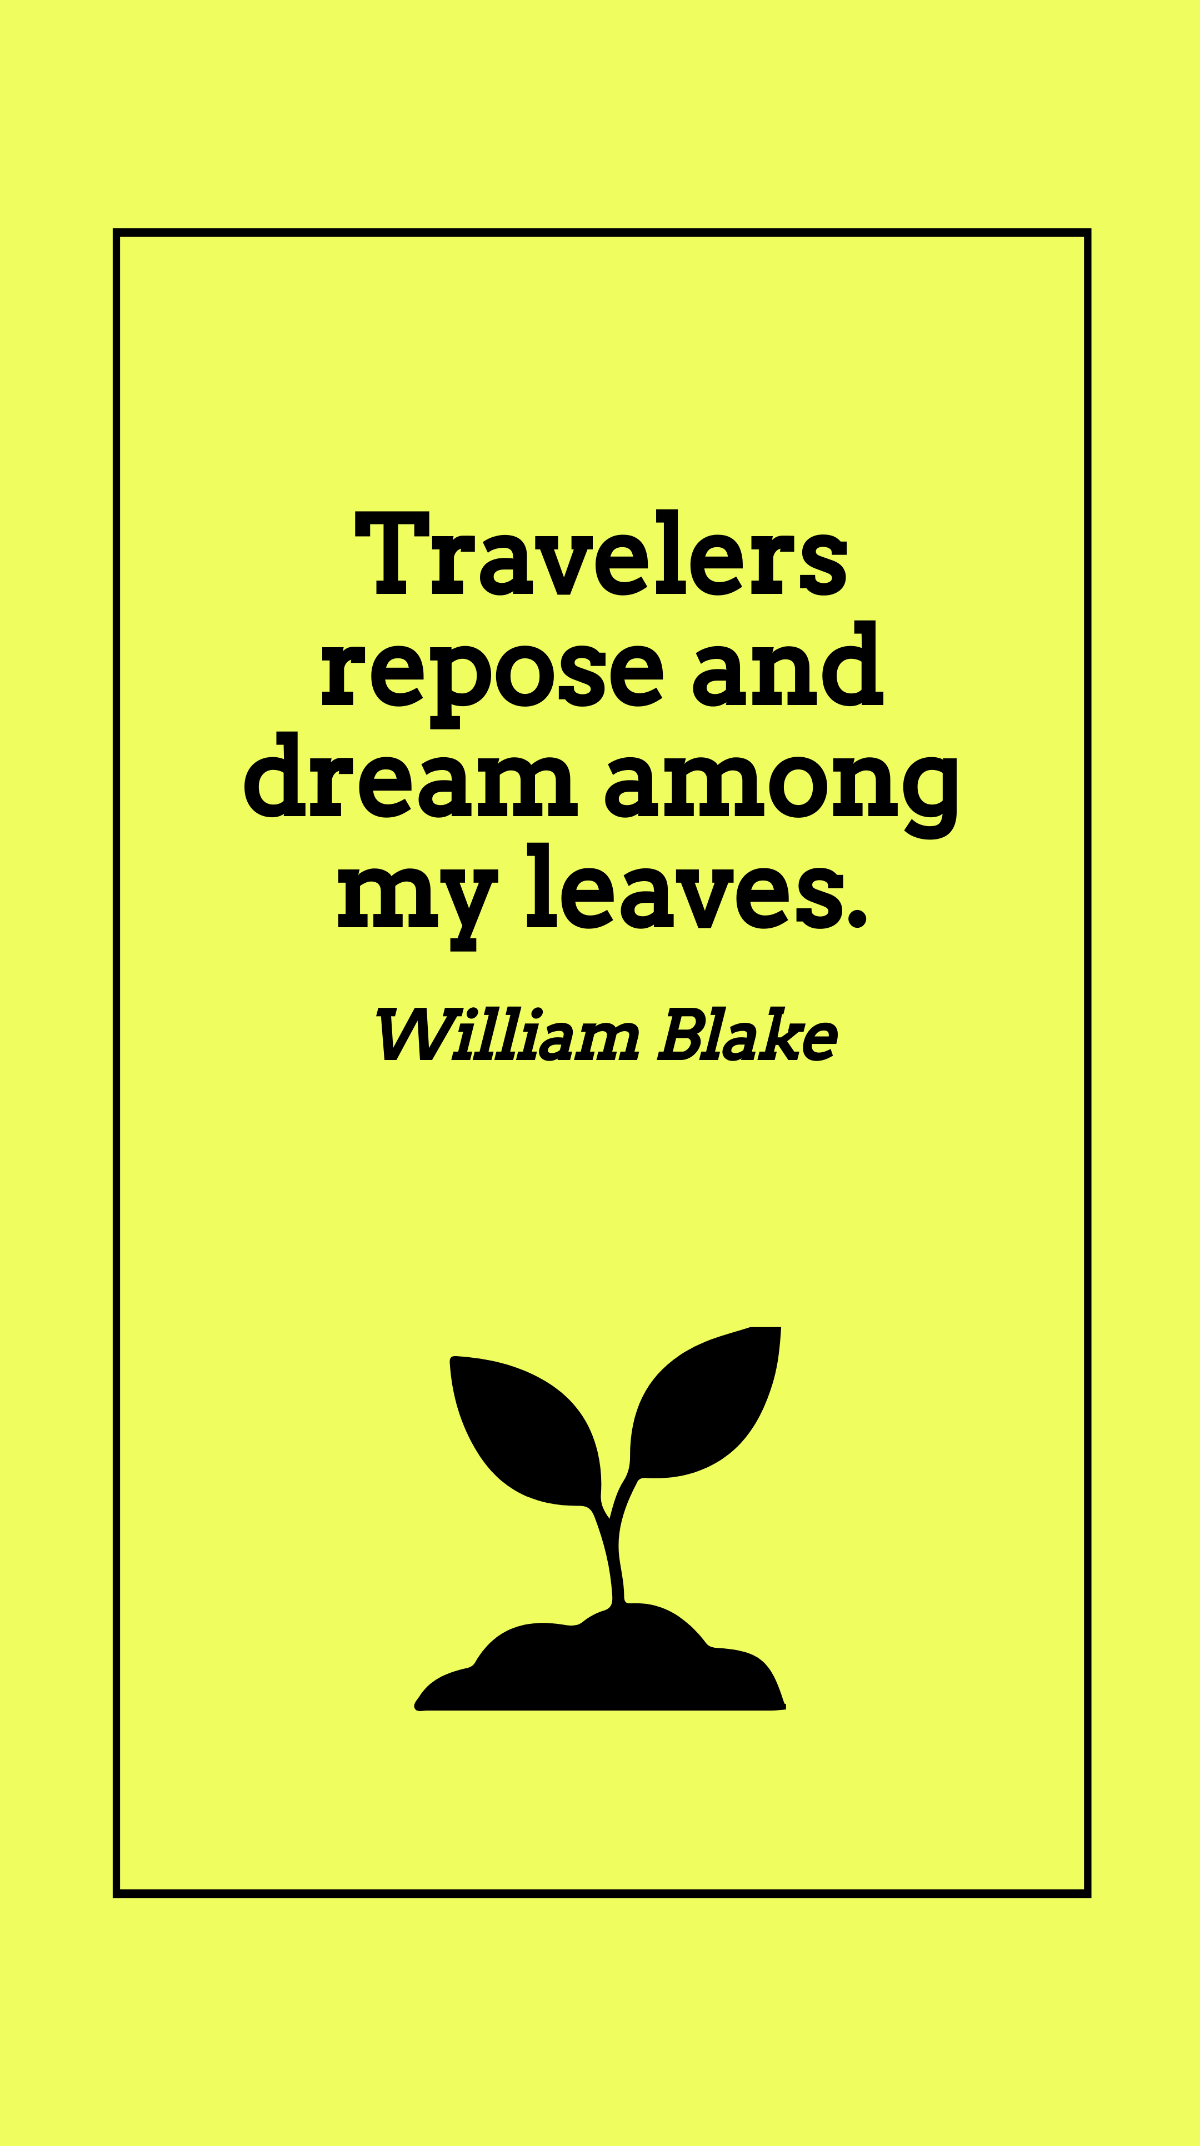 William Blake - Travelers repose and dream among my leaves.